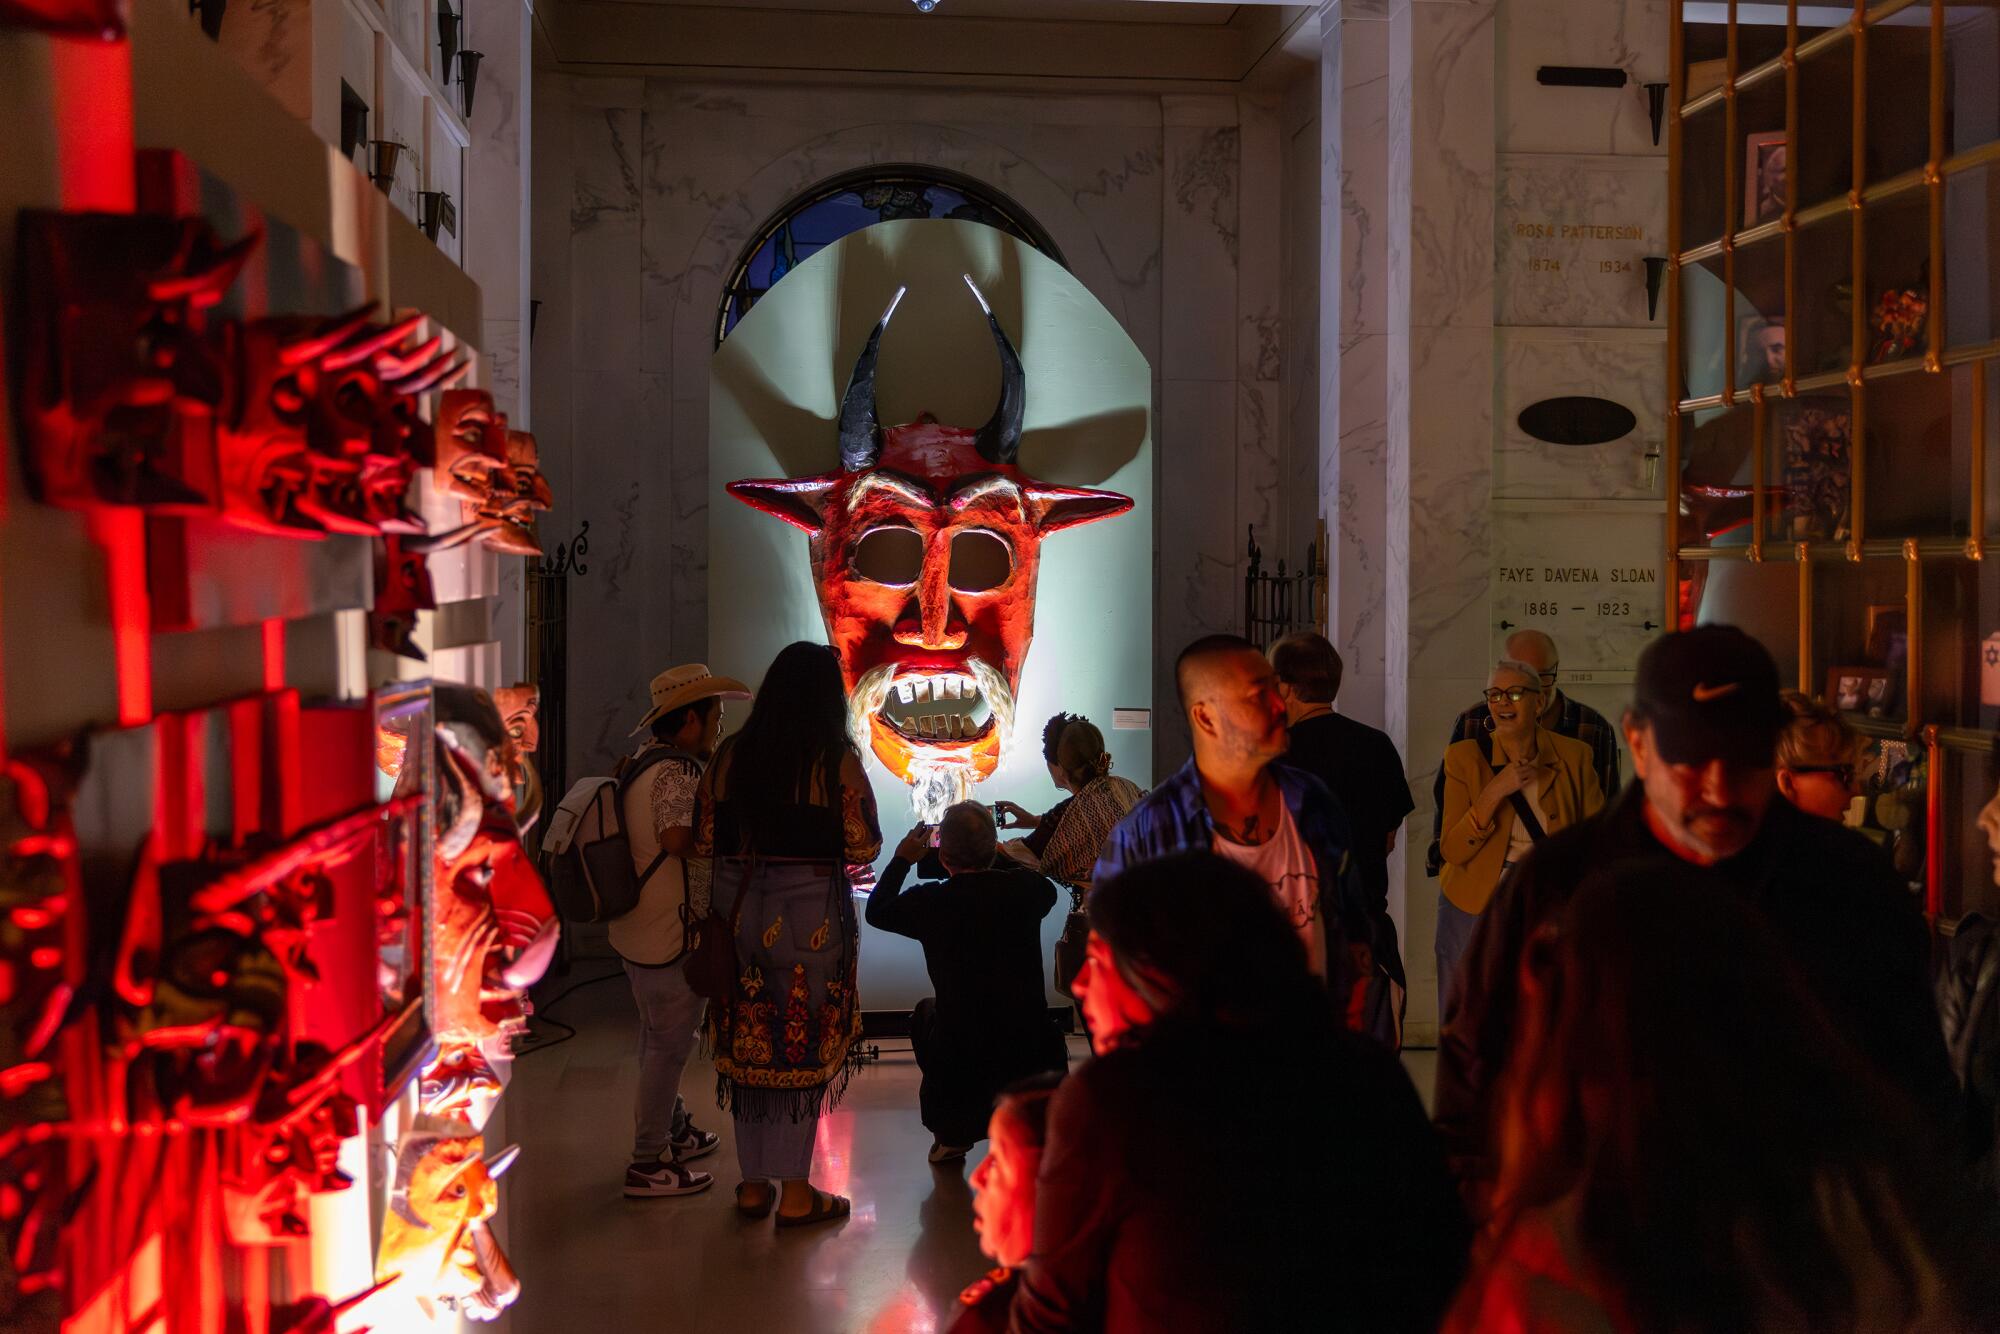 The exhibition of masks on display inside the mausoleum at the Hollywood Forever Cemetery.